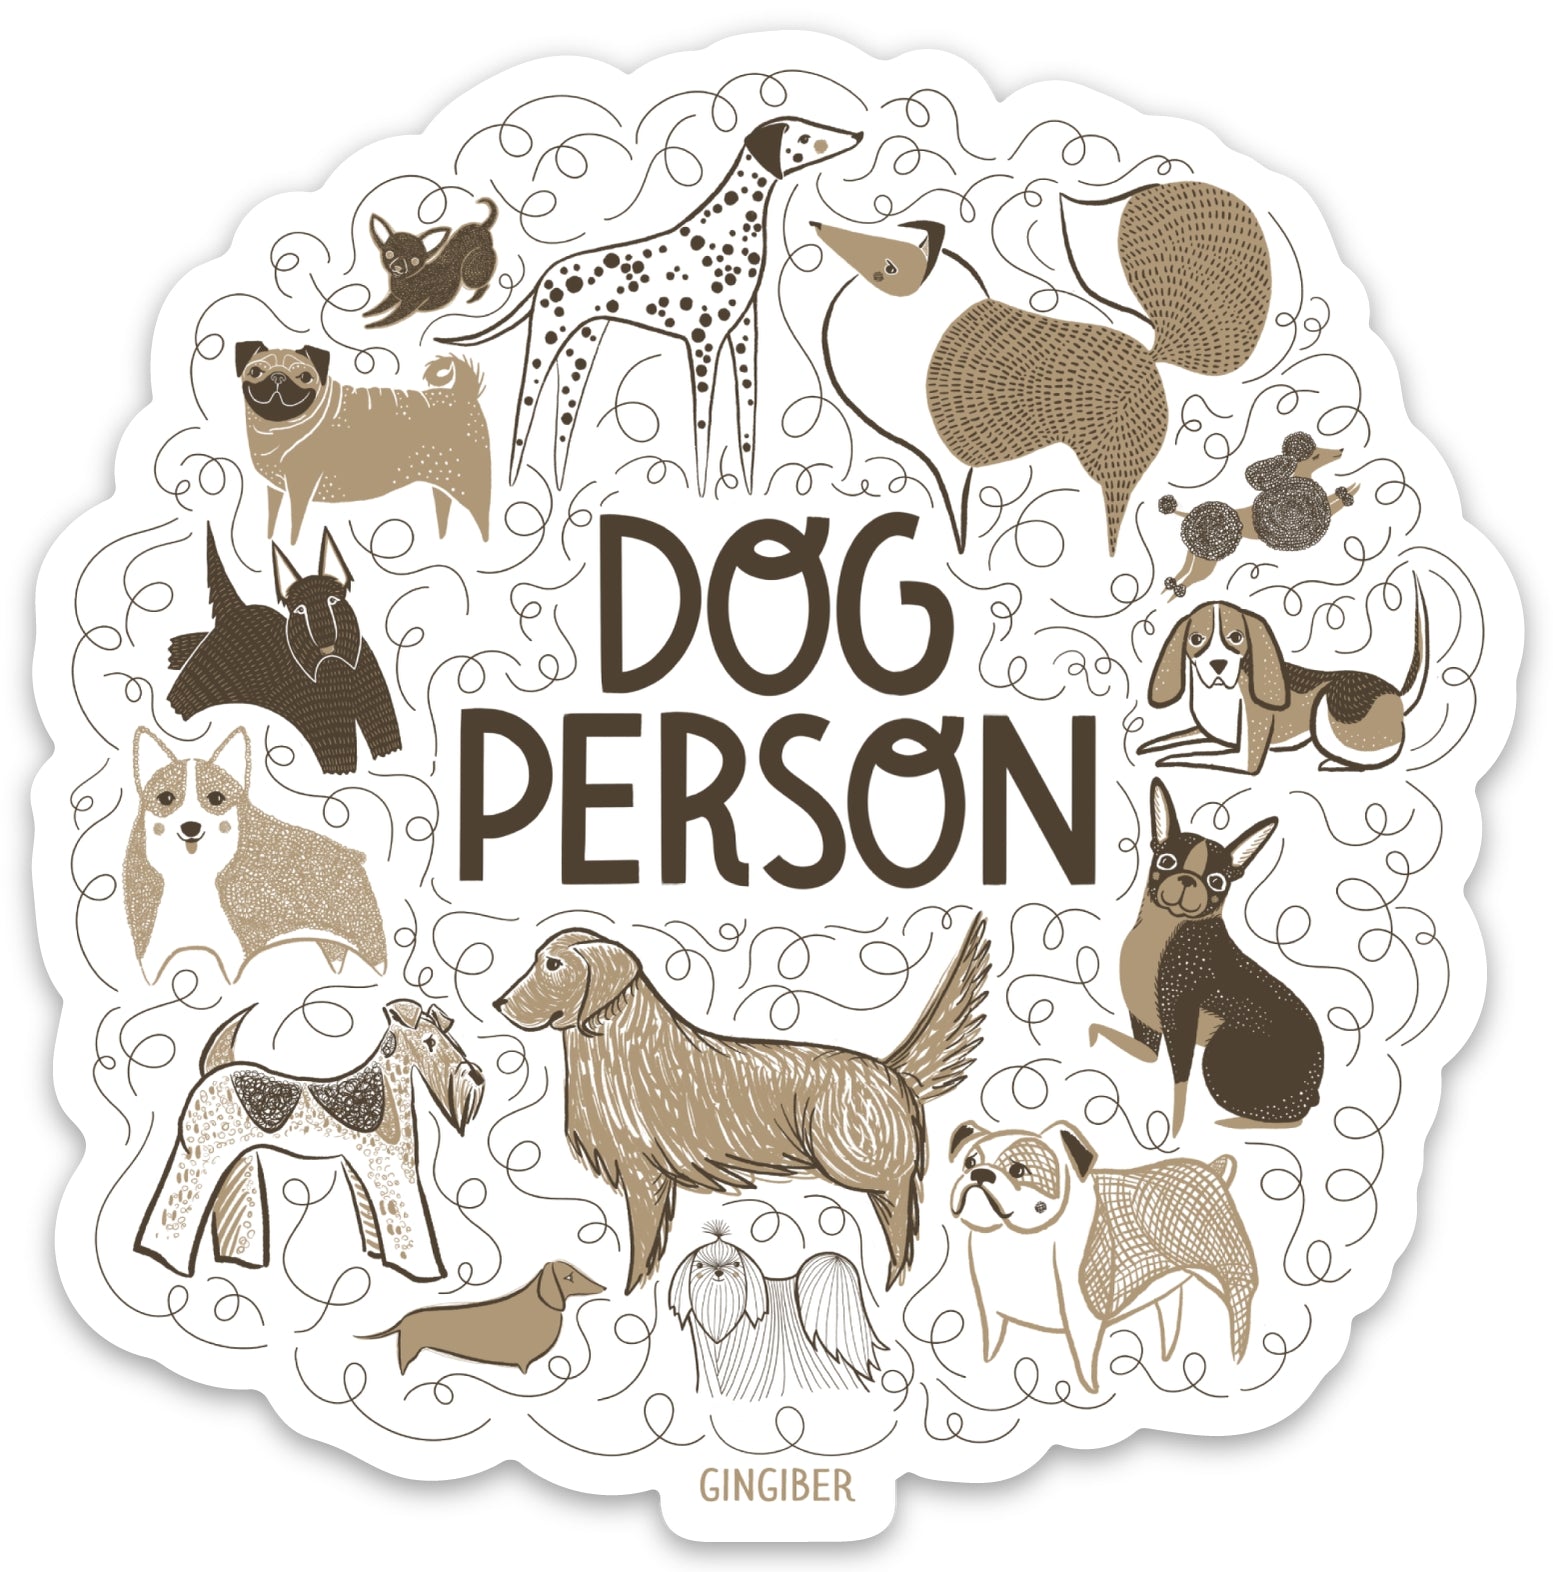 Sticker with white background and images of dogs in taupe, brown, black and grey with black squiggly lines and black text says, "Dog person". 